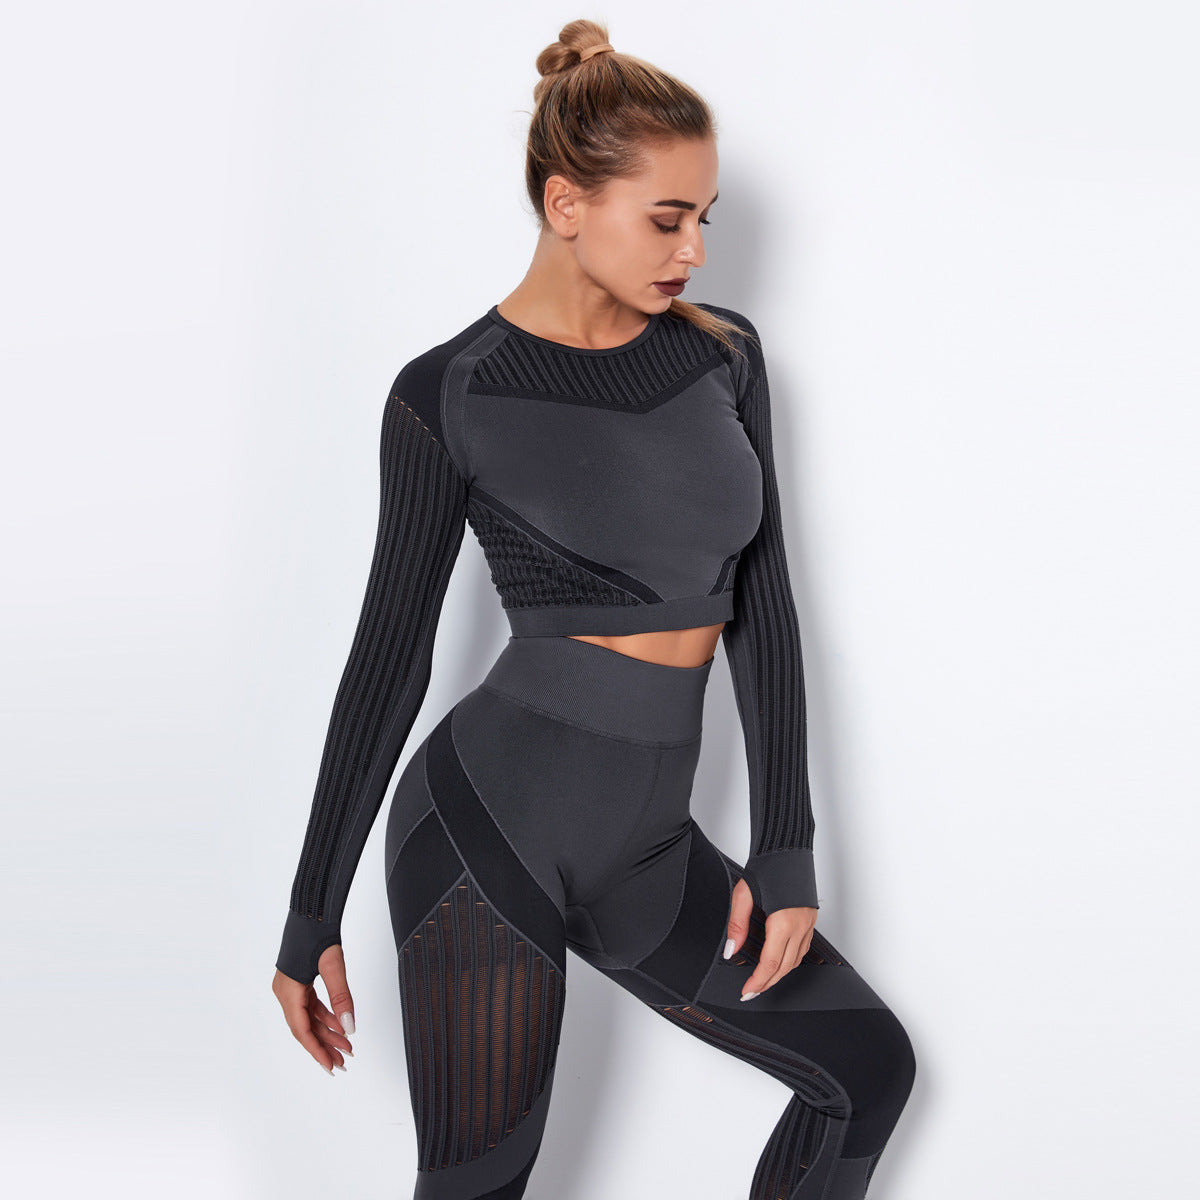 New Sports Skinny Hollow-out Plastic Top Quick-Drying Running Yoga Clothes Seamless Workout Long Sleeve